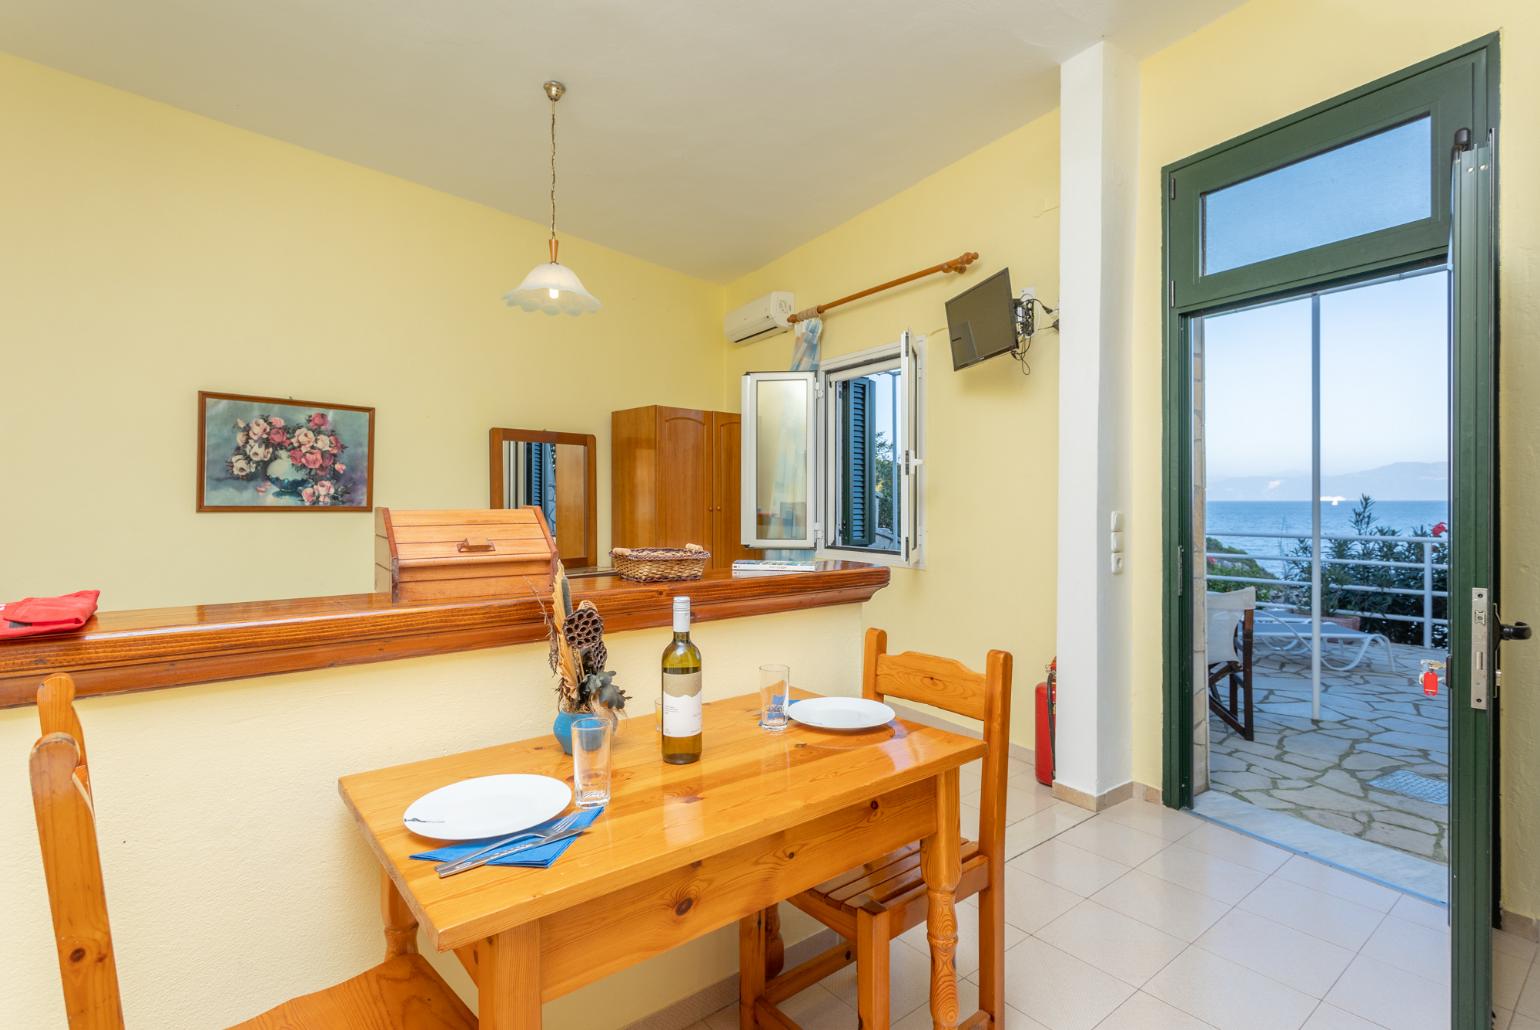 Open-plan studio with twin beds, dining area, kitchen, A/C, WiFi internet, satellite TV, and sea views